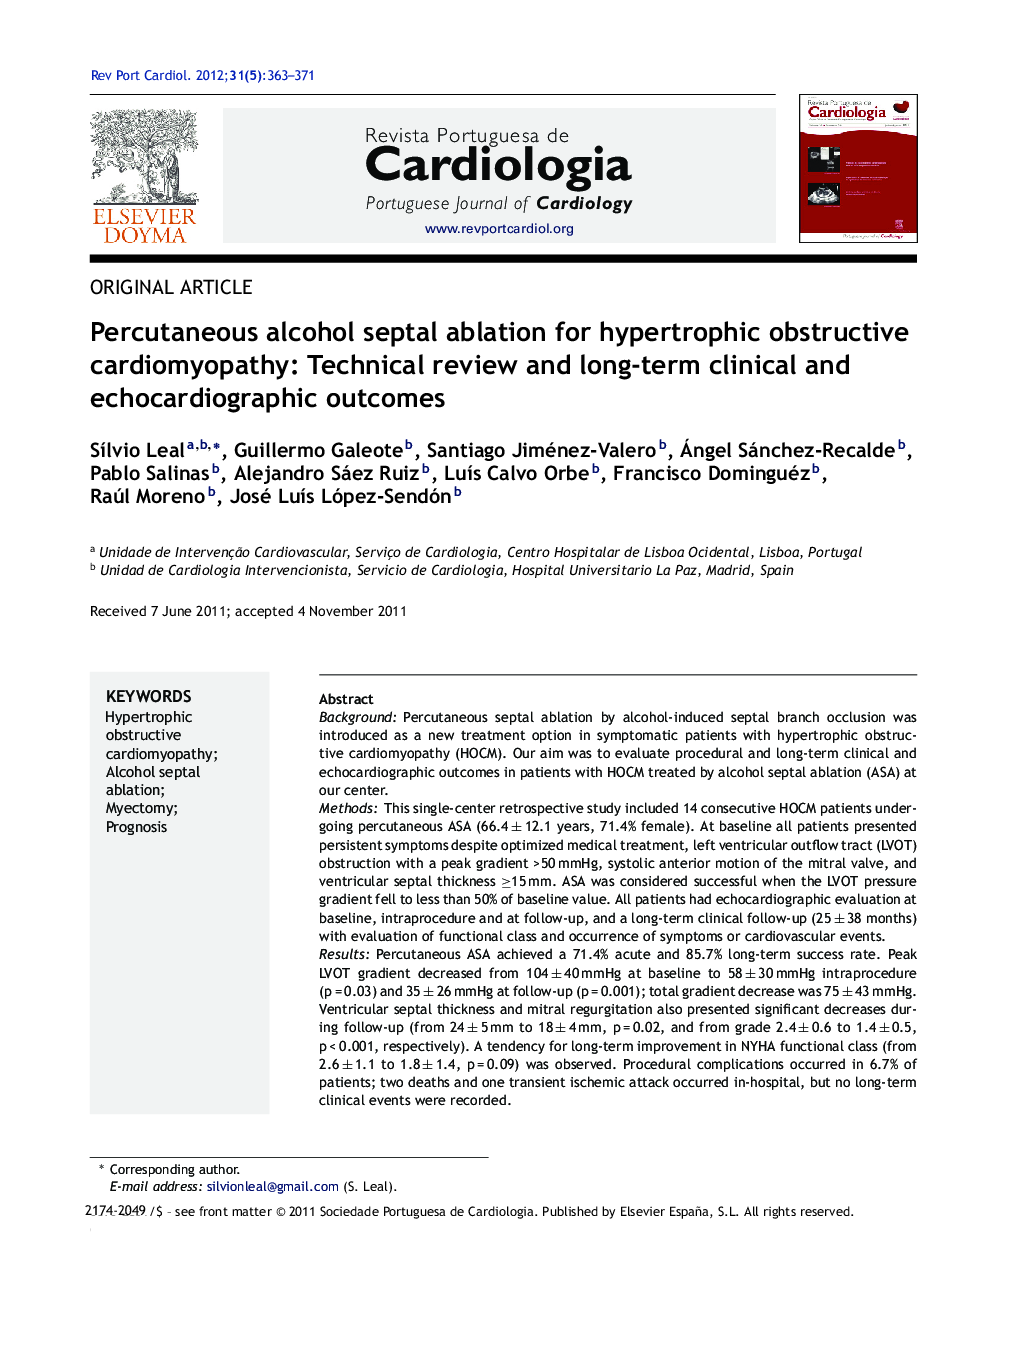 Percutaneous alcohol septal ablation for hypertrophic obstructive cardiomyopathy: Technical review and long-term clinical and echocardiographic outcomes